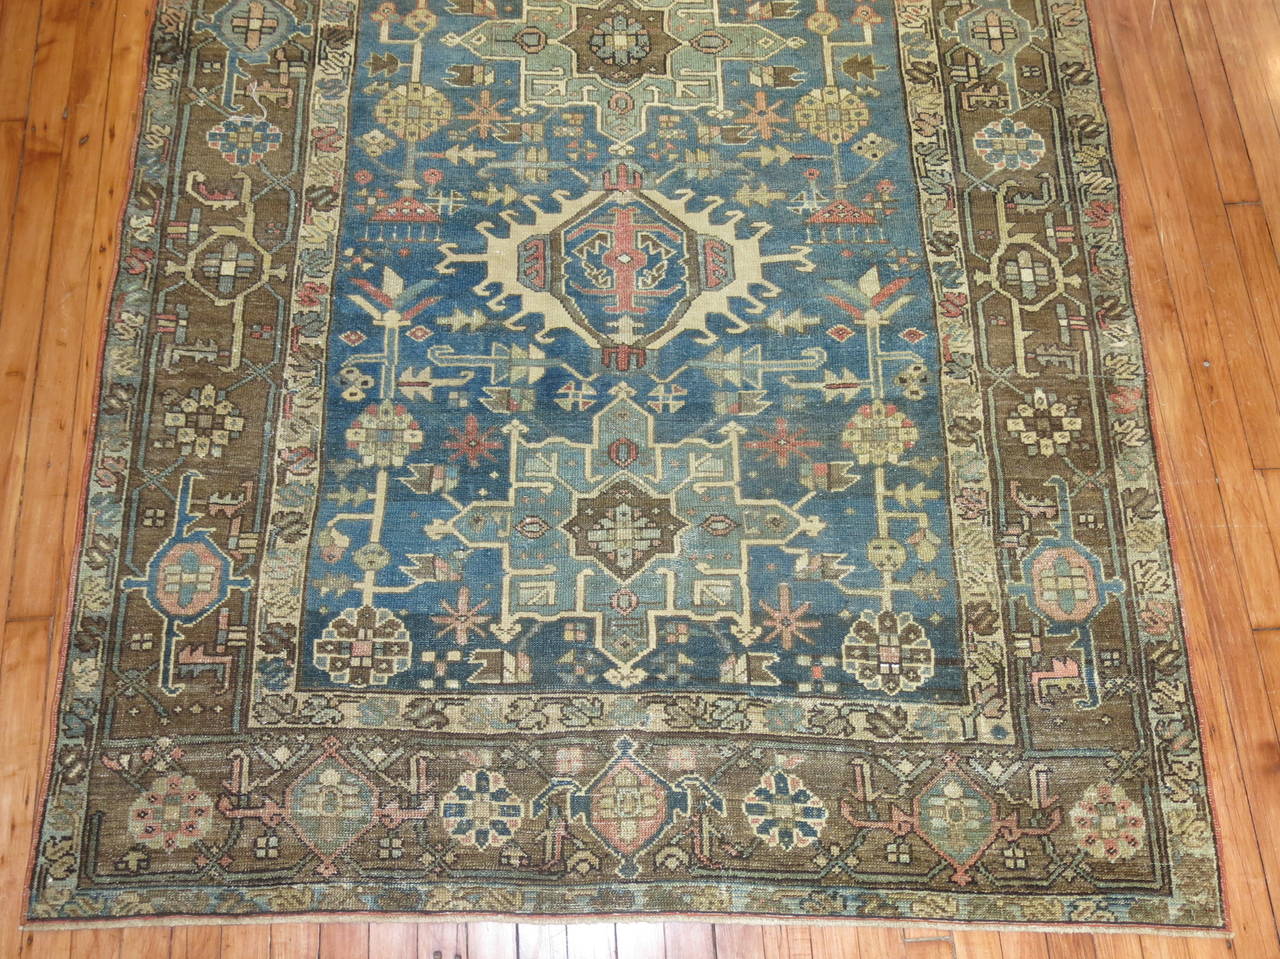 Square size Persian heriz rug with an ocean blue field and camel border.

Heriz carpets are beloved for their versatility. Their geometry complements modern furnishings and their warm colors and artistic depth enhance antiques of all kinds. Their